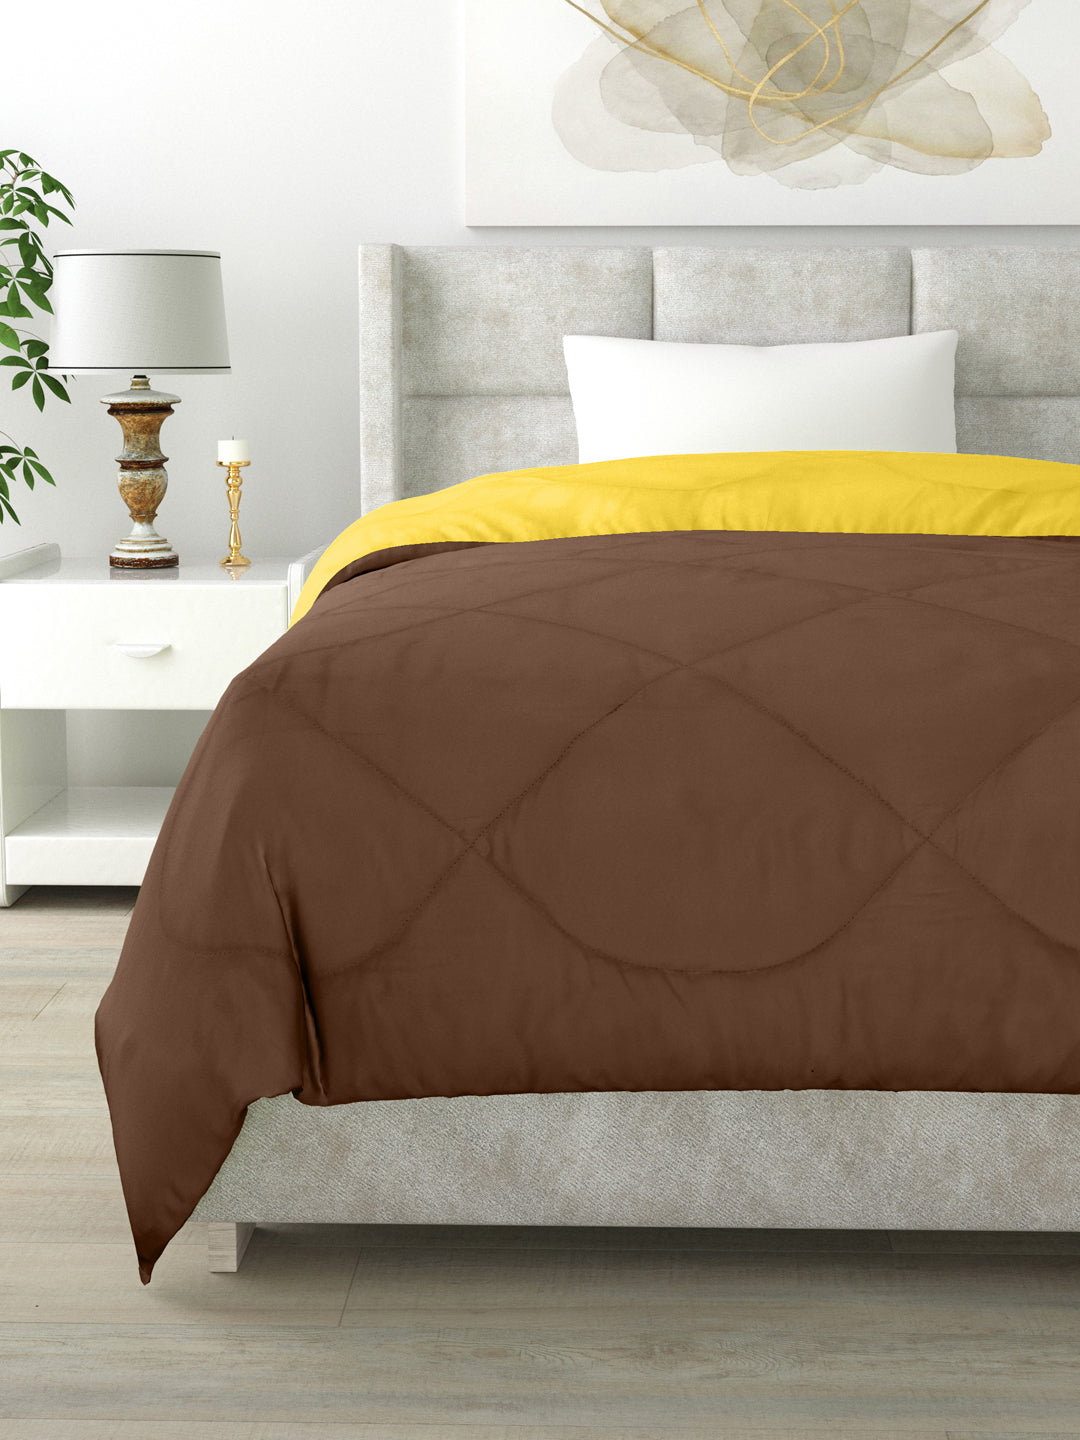 Reversible Single Bed Comforter 200 GSM 60x90 Inches (Yellow & Brown)